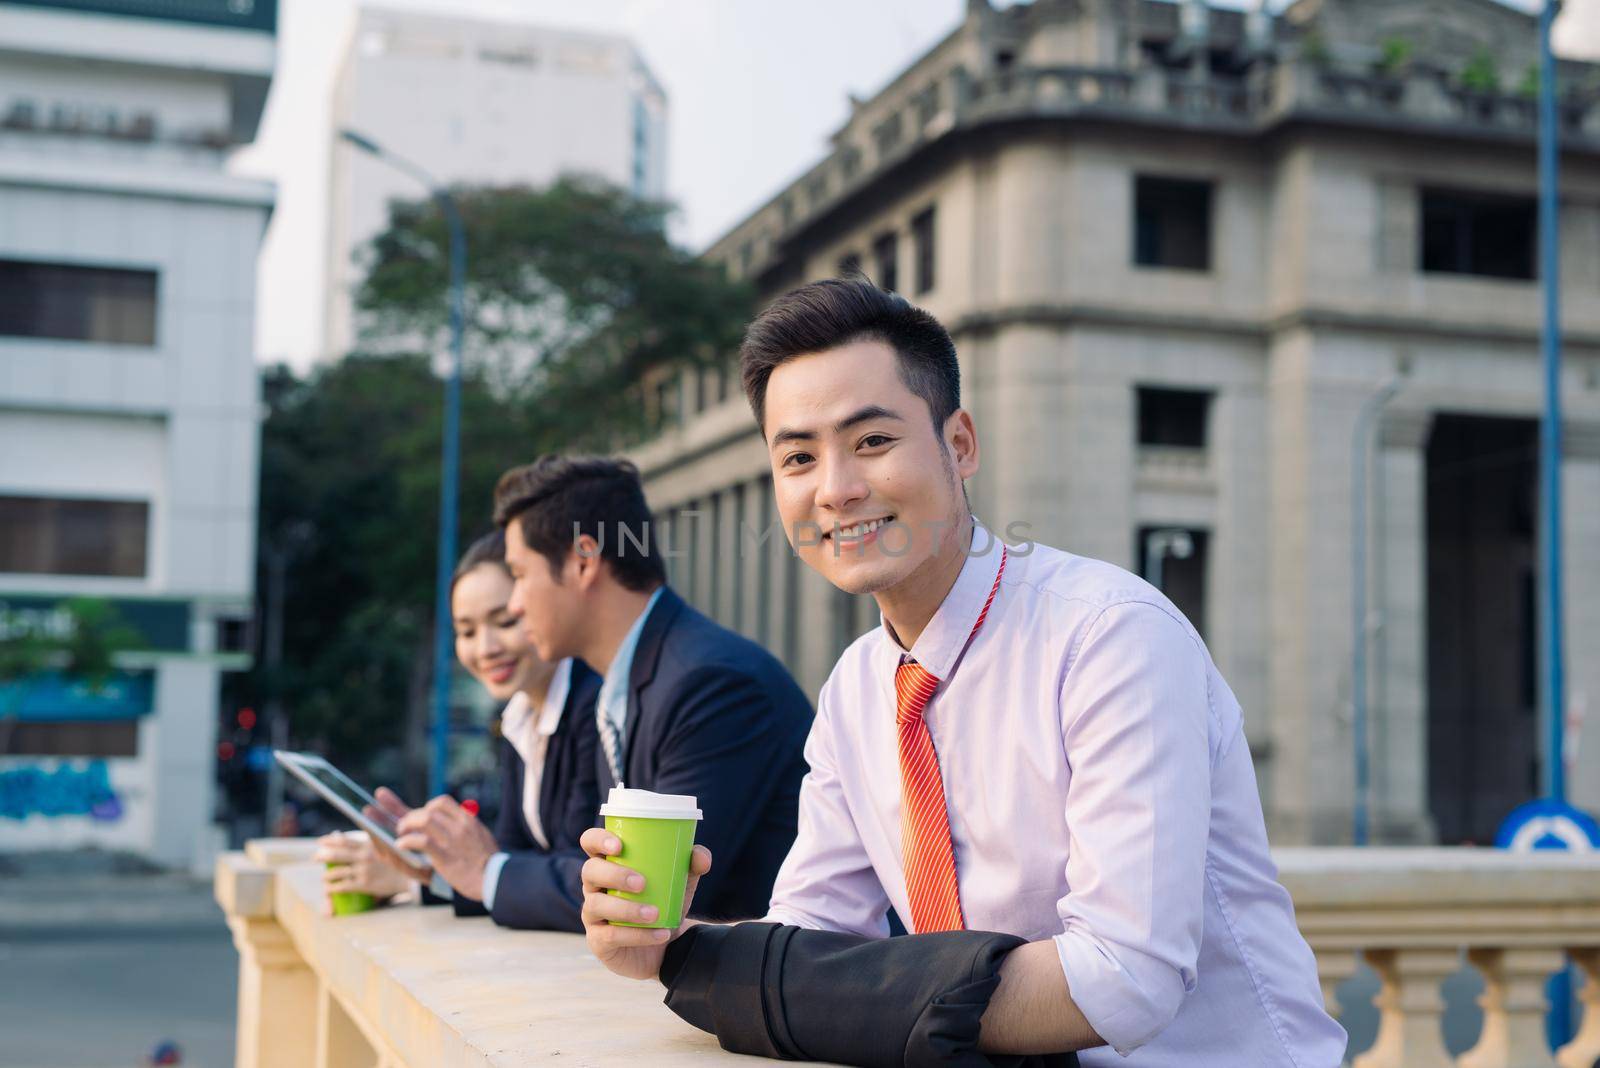 Asian business woman and men having coffee break outside in front of building by makidotvn